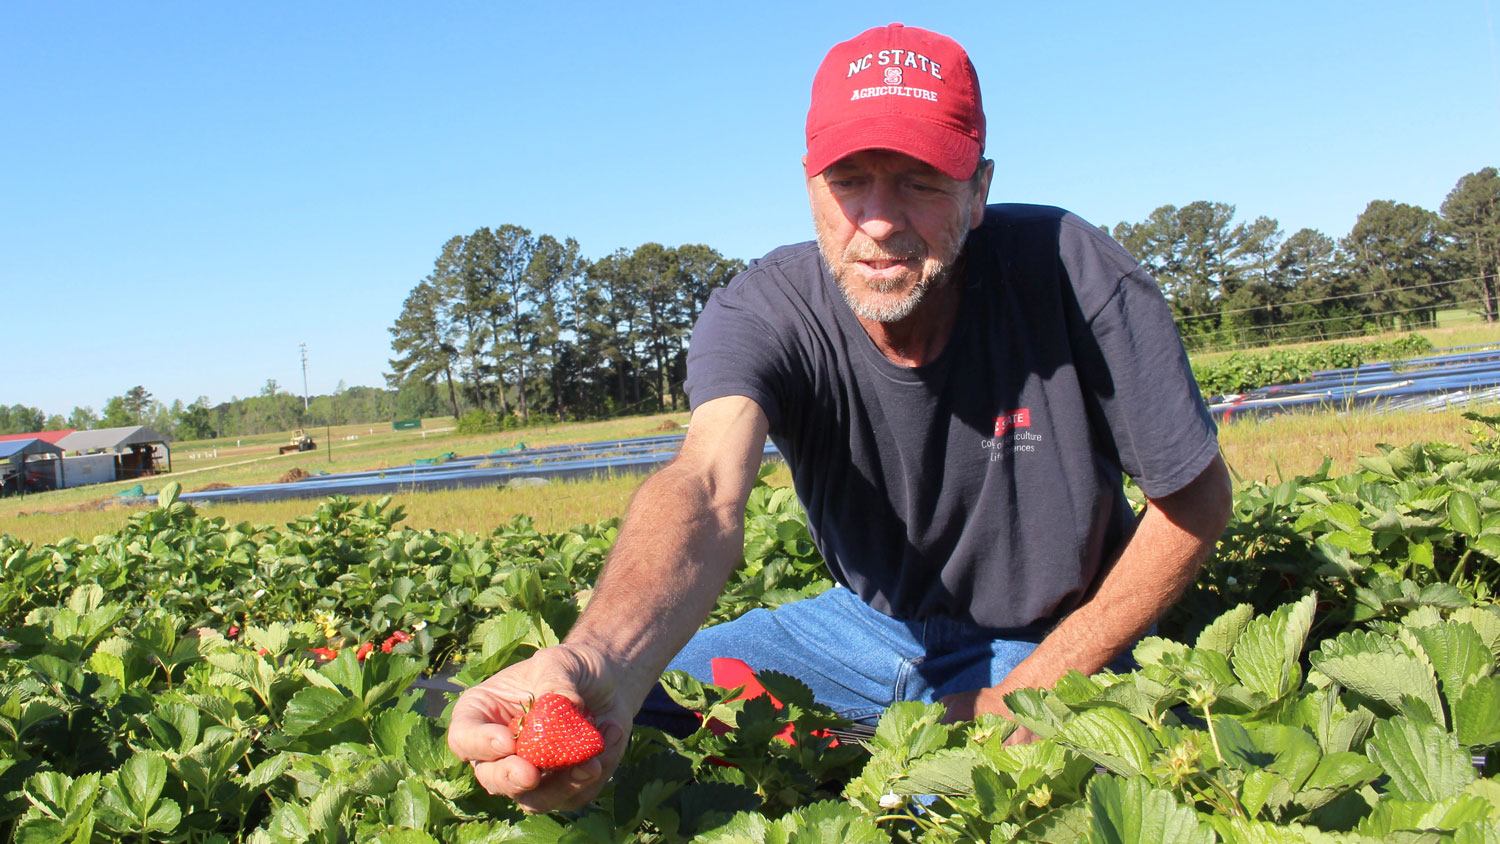 man squatting in strawberry research plot, holding a large strawberry